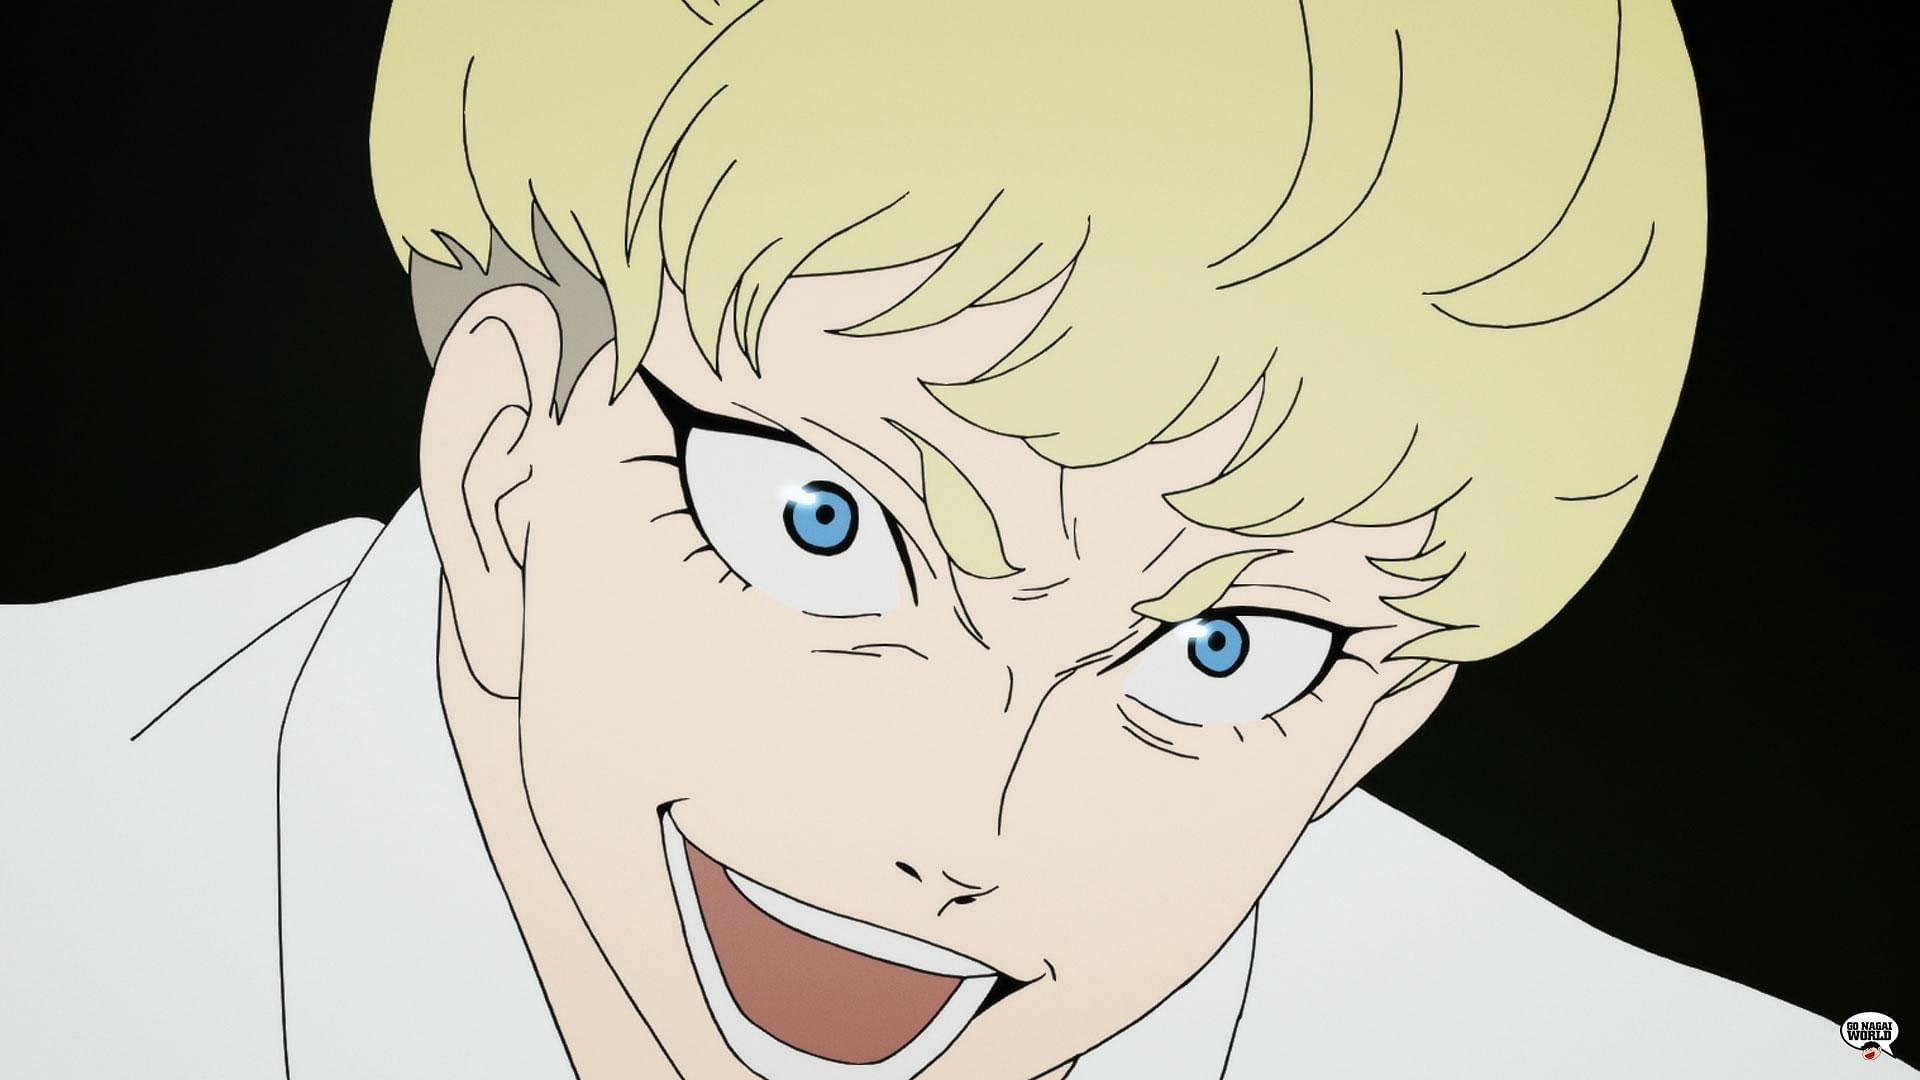 Ryo laughing about his plans (Image credits: Go Nagai, Science Saru, Devilman Crybaby)